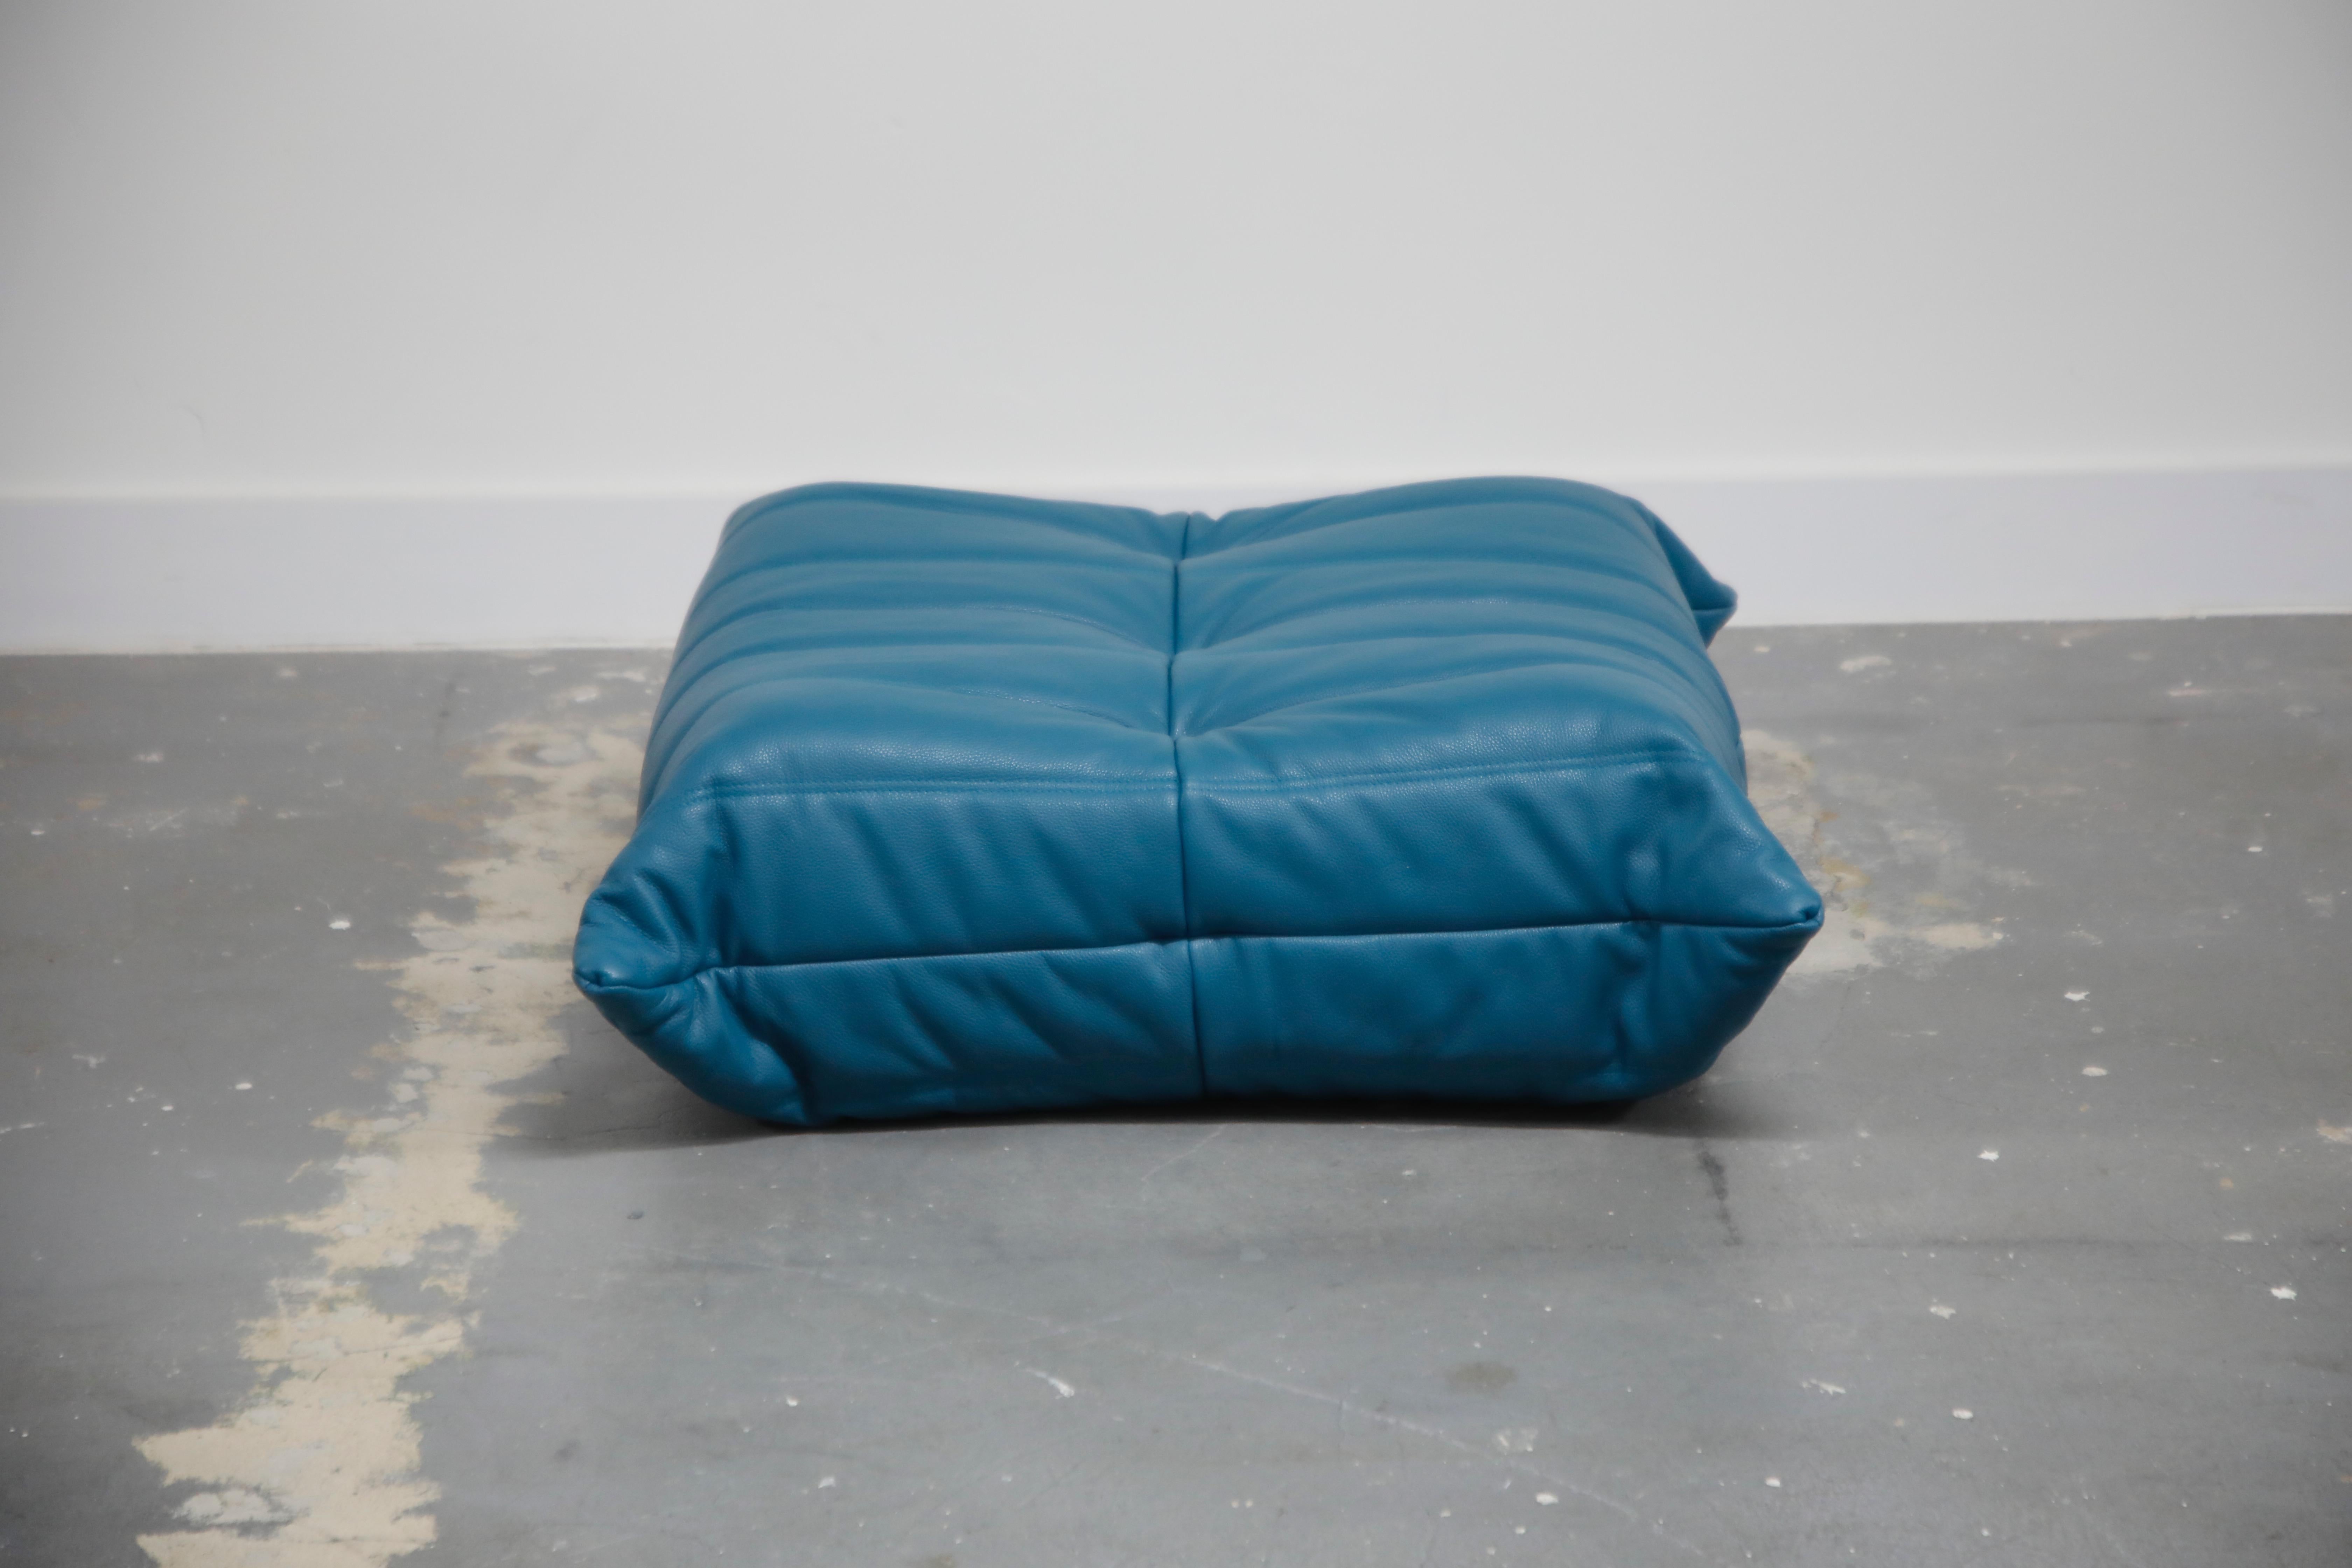 This incredible ottoman was designed by Michel Ducaroy in 1973 for Ligne Roset, France. This single piece from a larger set was completely restored with new high grade Bovine leather upholstery in a mesmerizing petrol blue color, and bottom decking